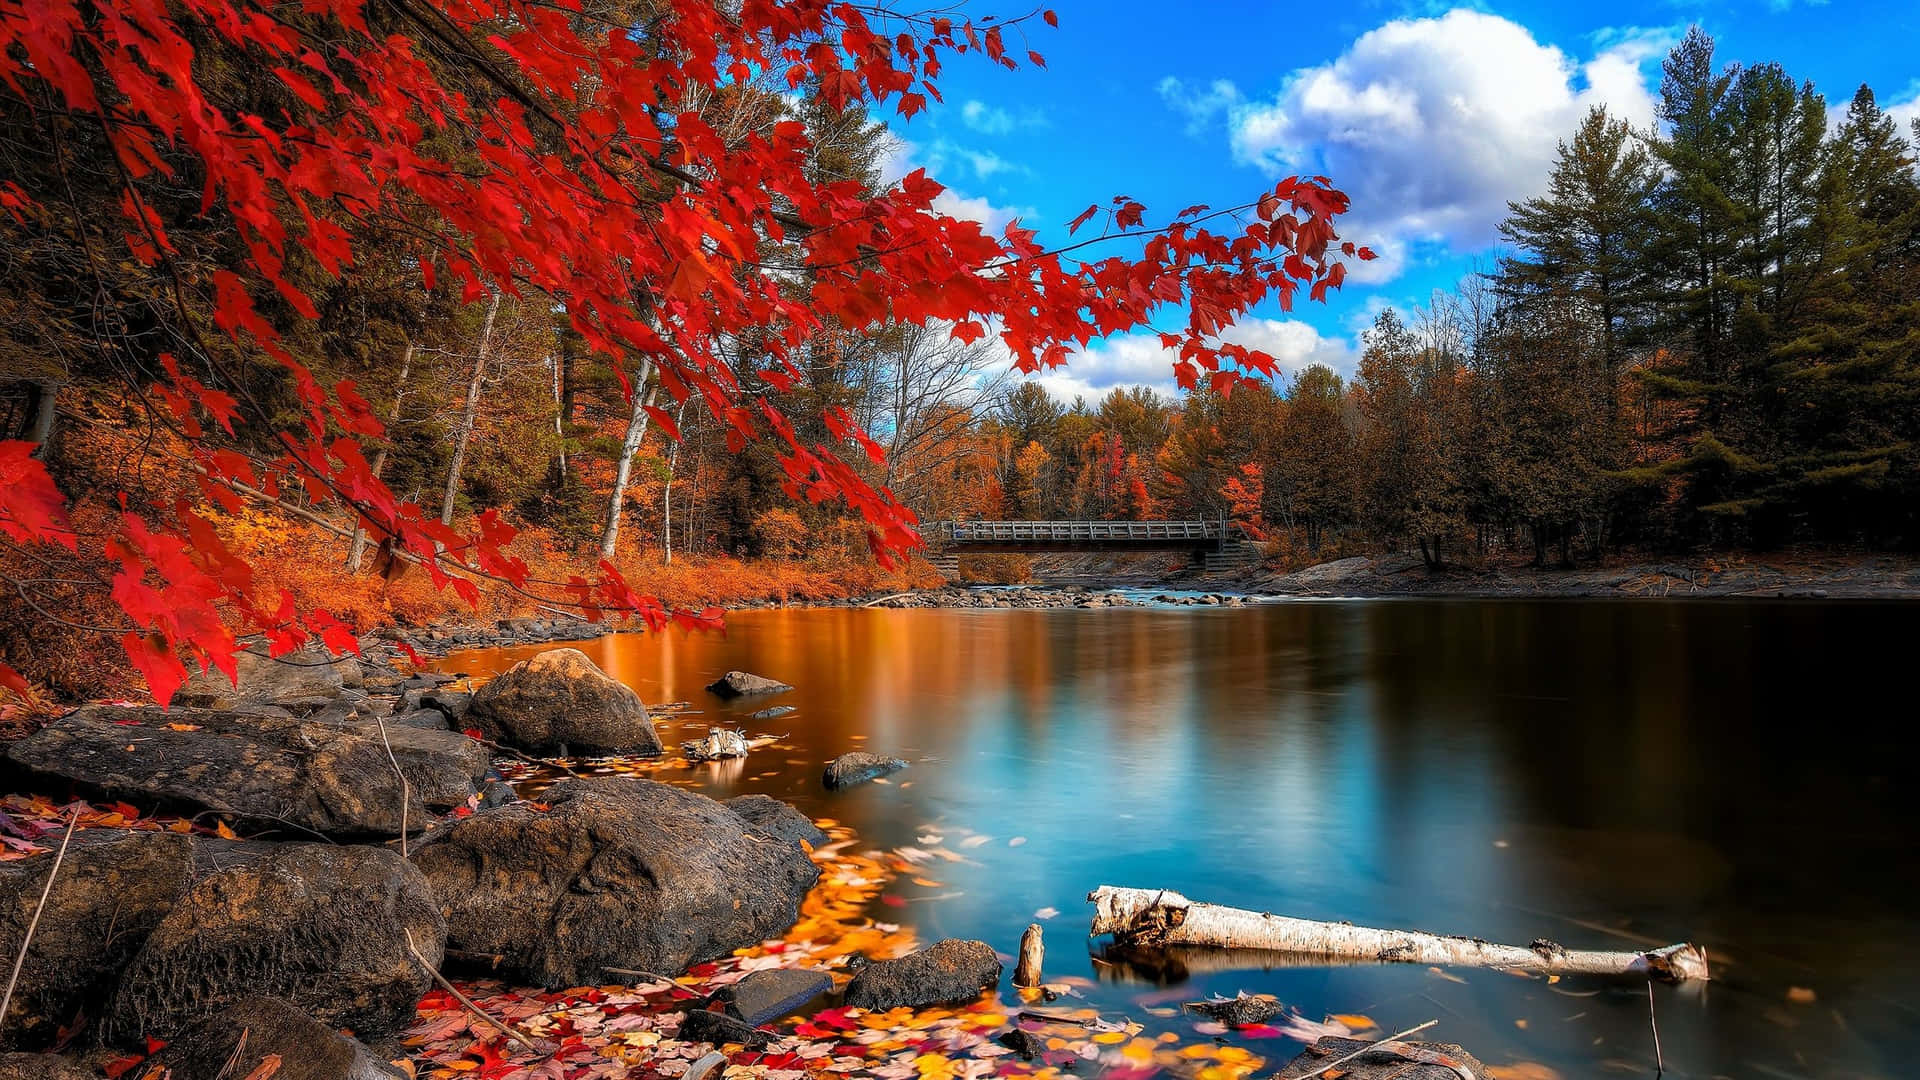 Enjoying a scenic view of the fall colors. Wallpaper